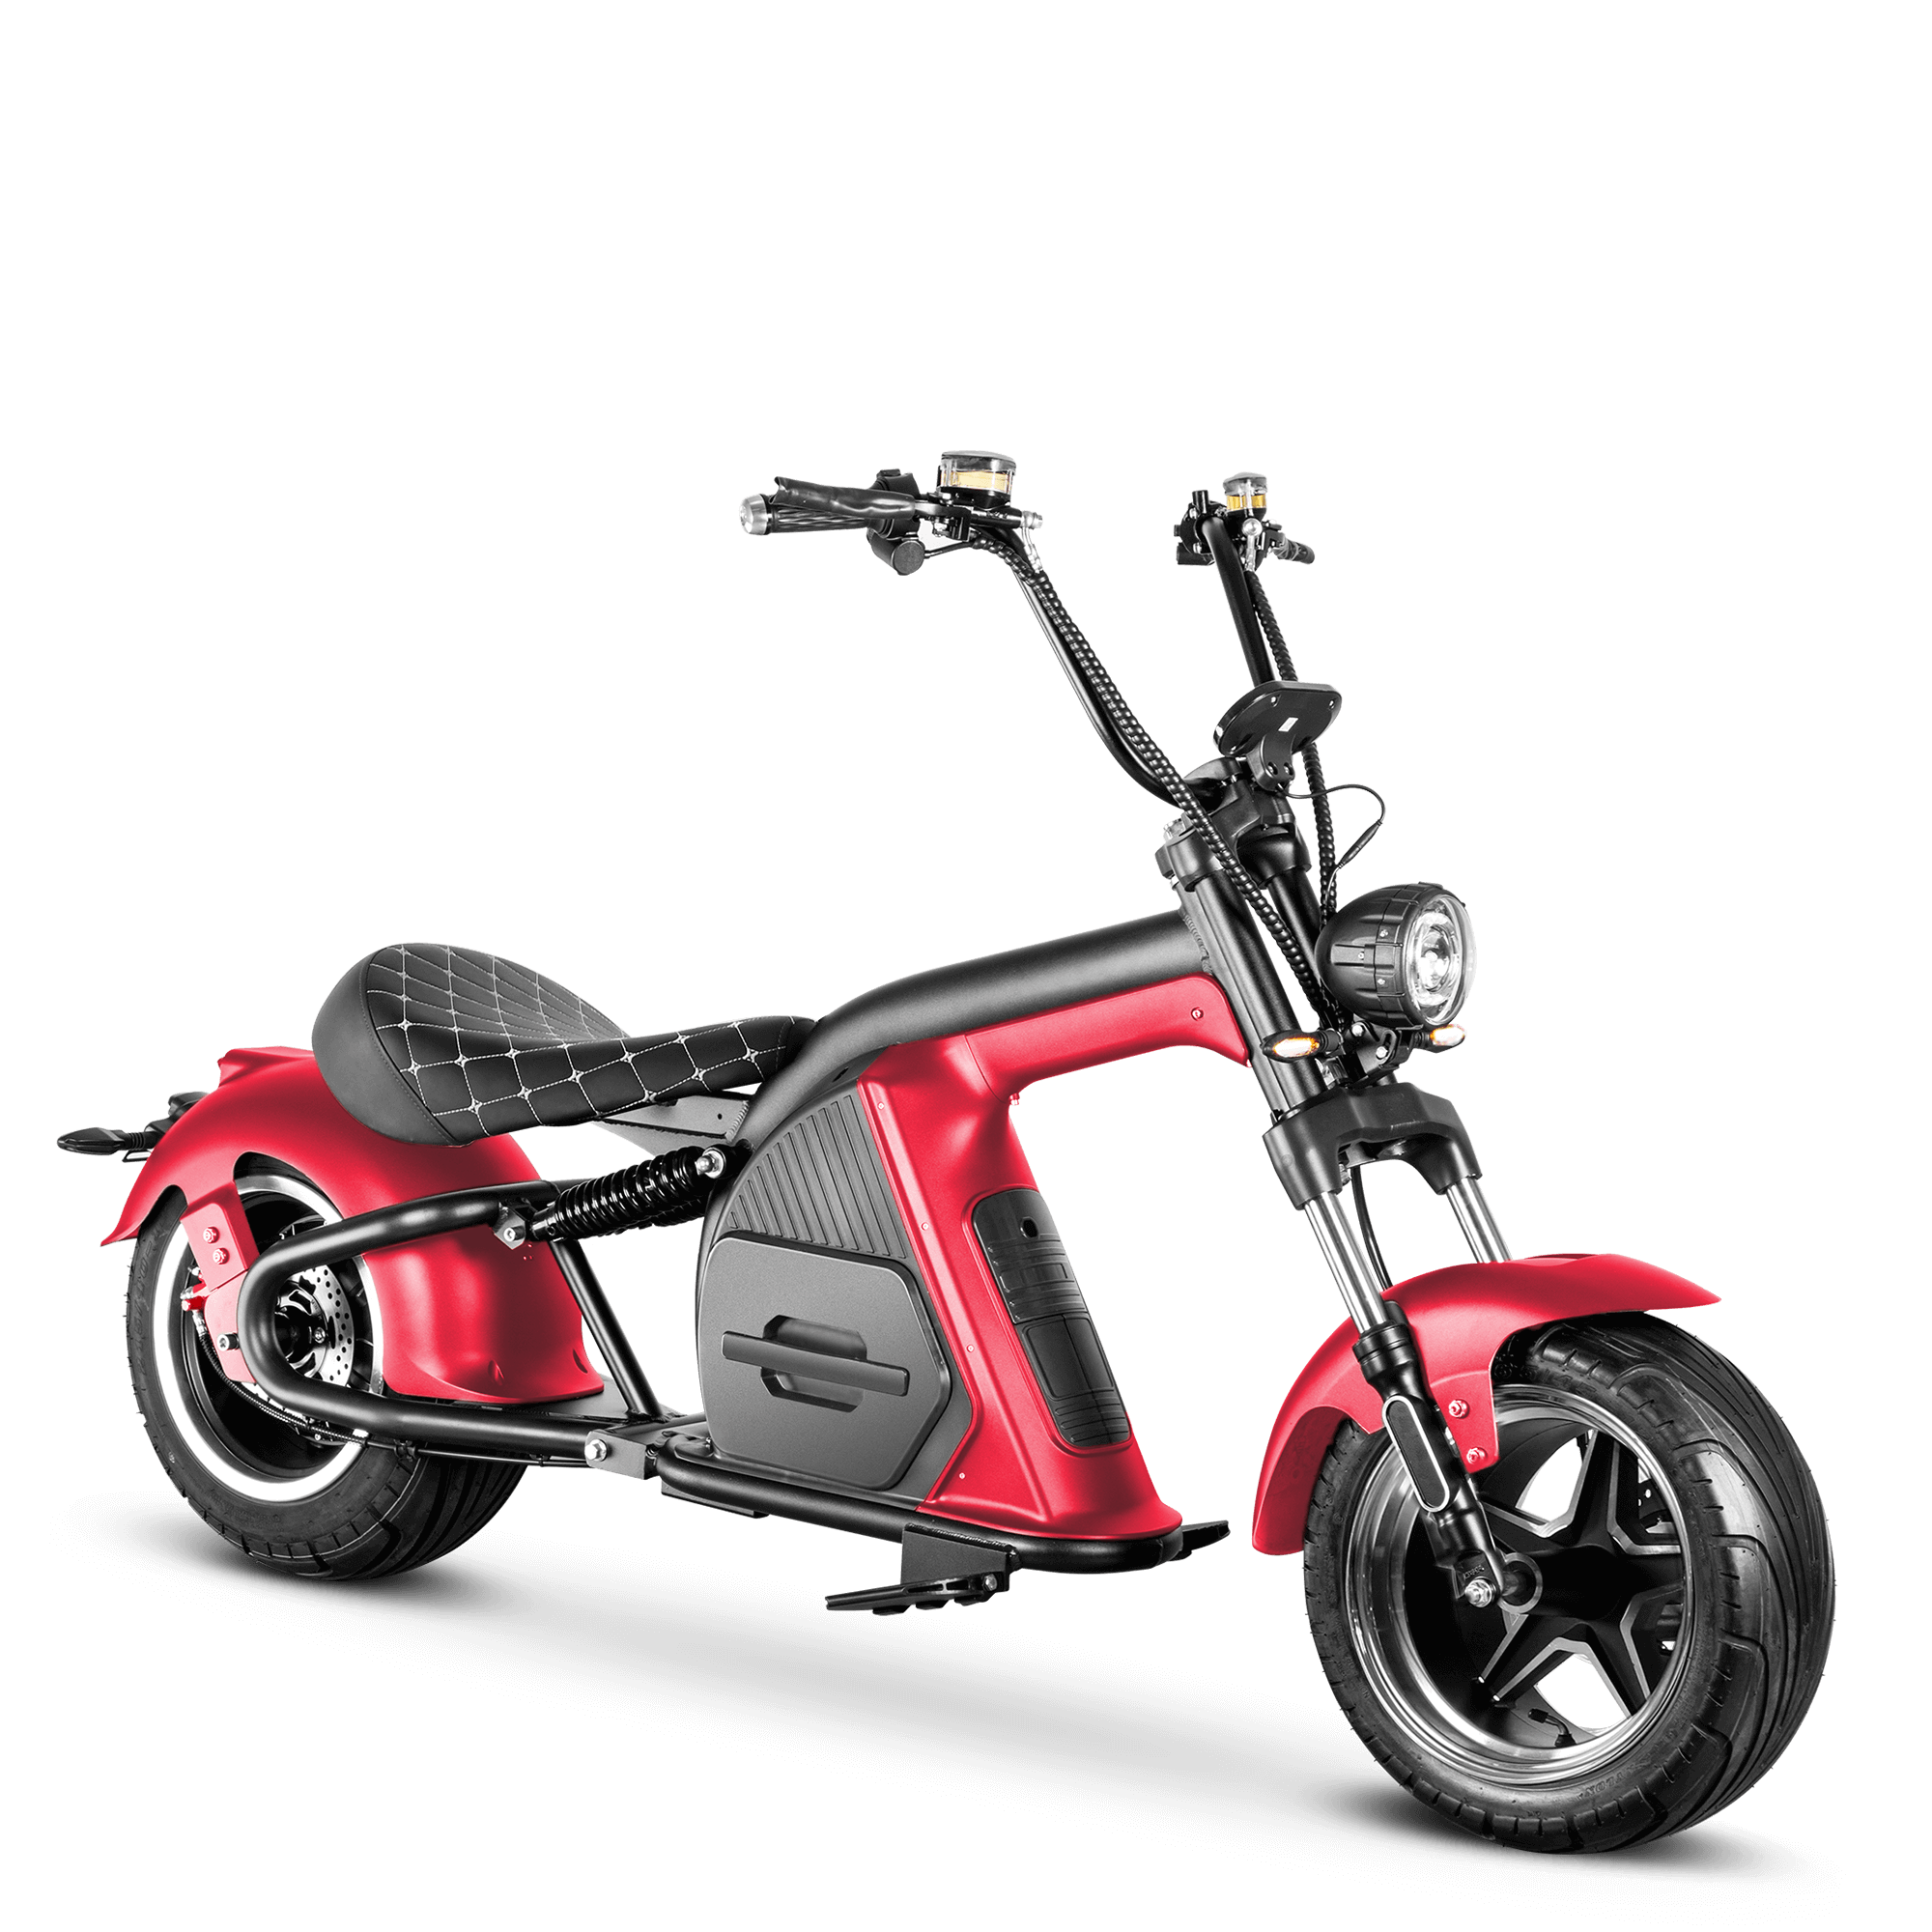 2000W Electric Chopper Scooter_Big Wheel Electric Scooter_Eahora Emoto M8_Red